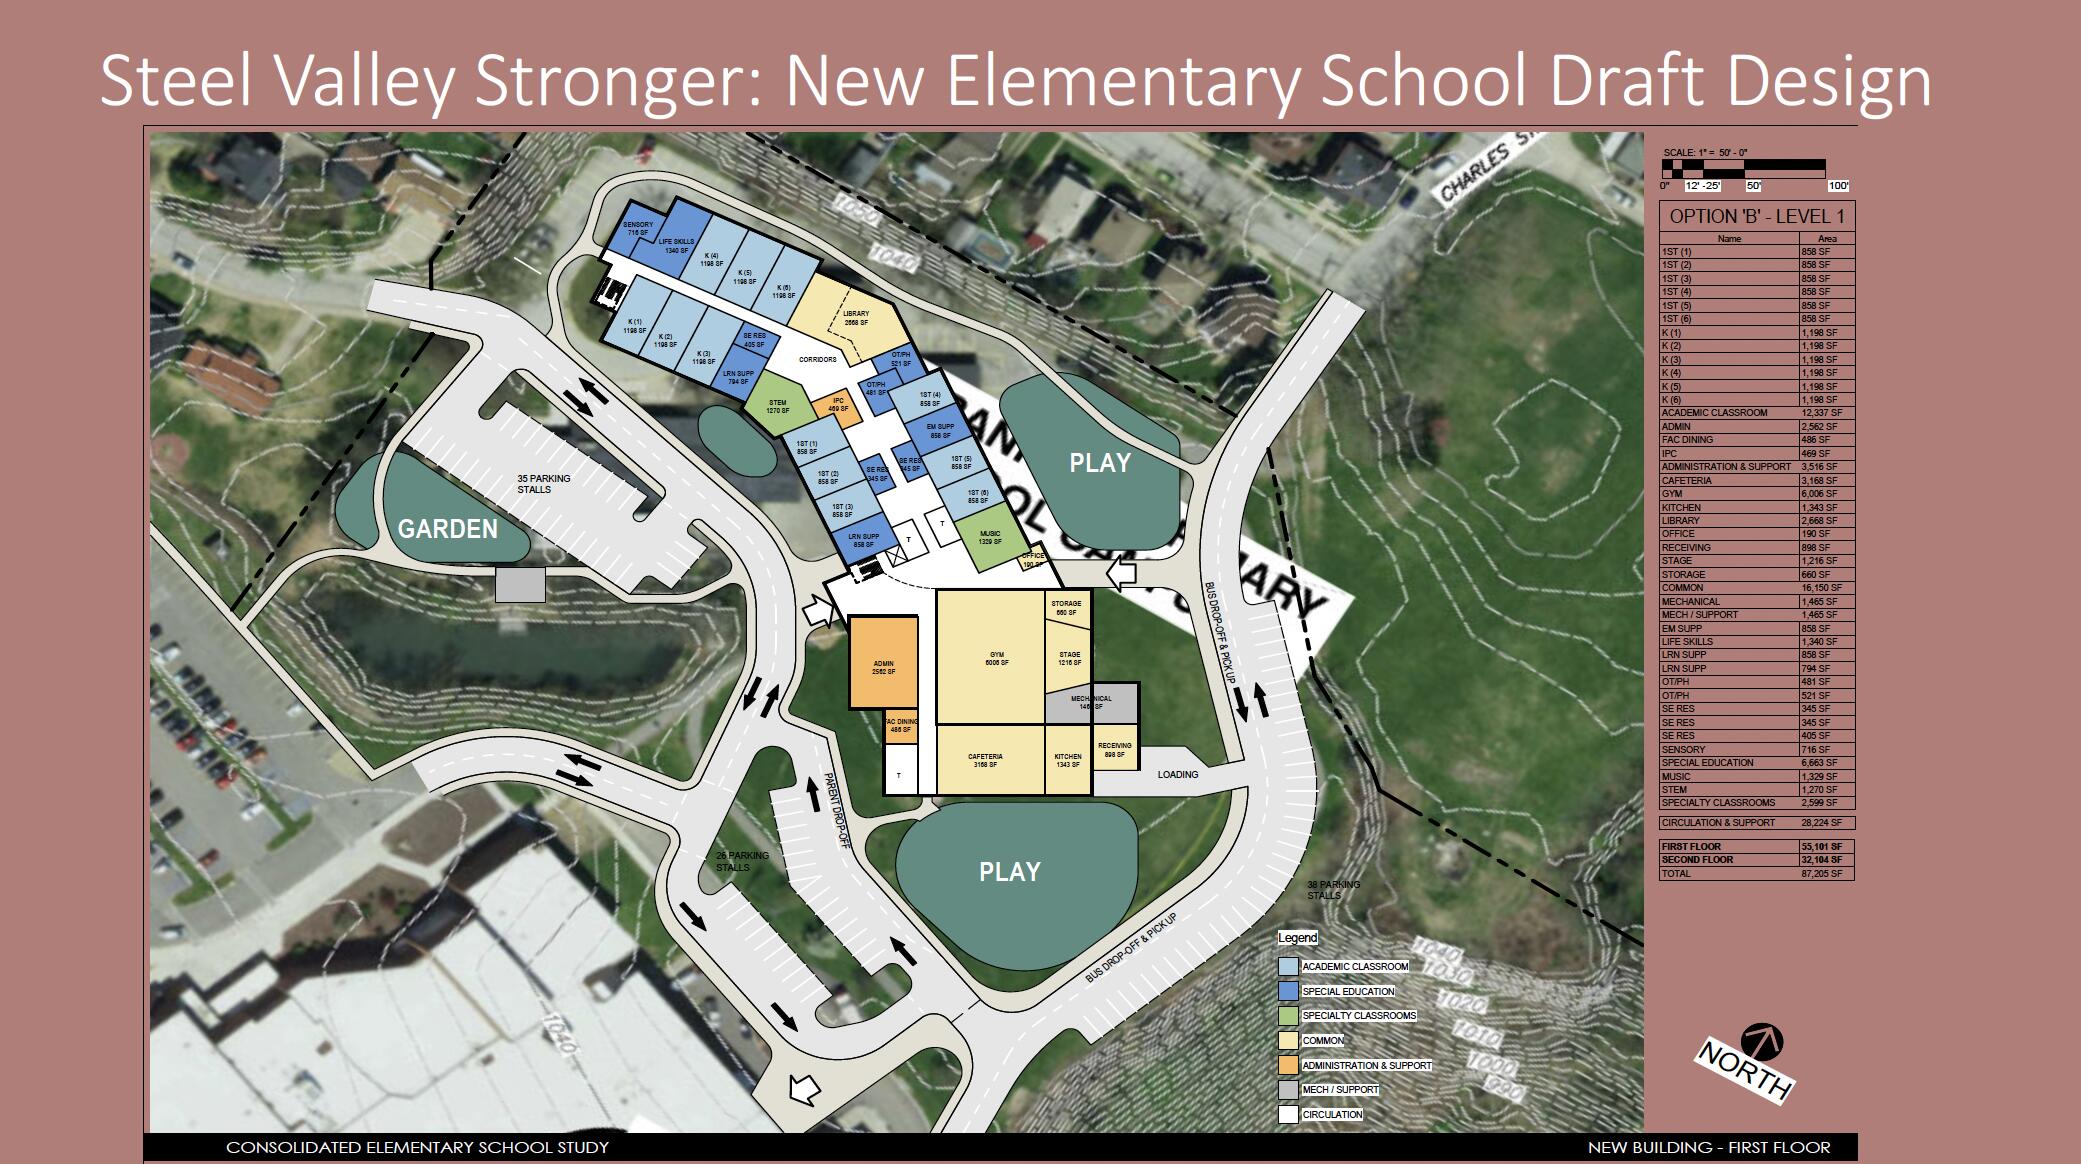 A rendering of a hypothetical new elementary building on the Campbell Campus in the Steel Valley School District